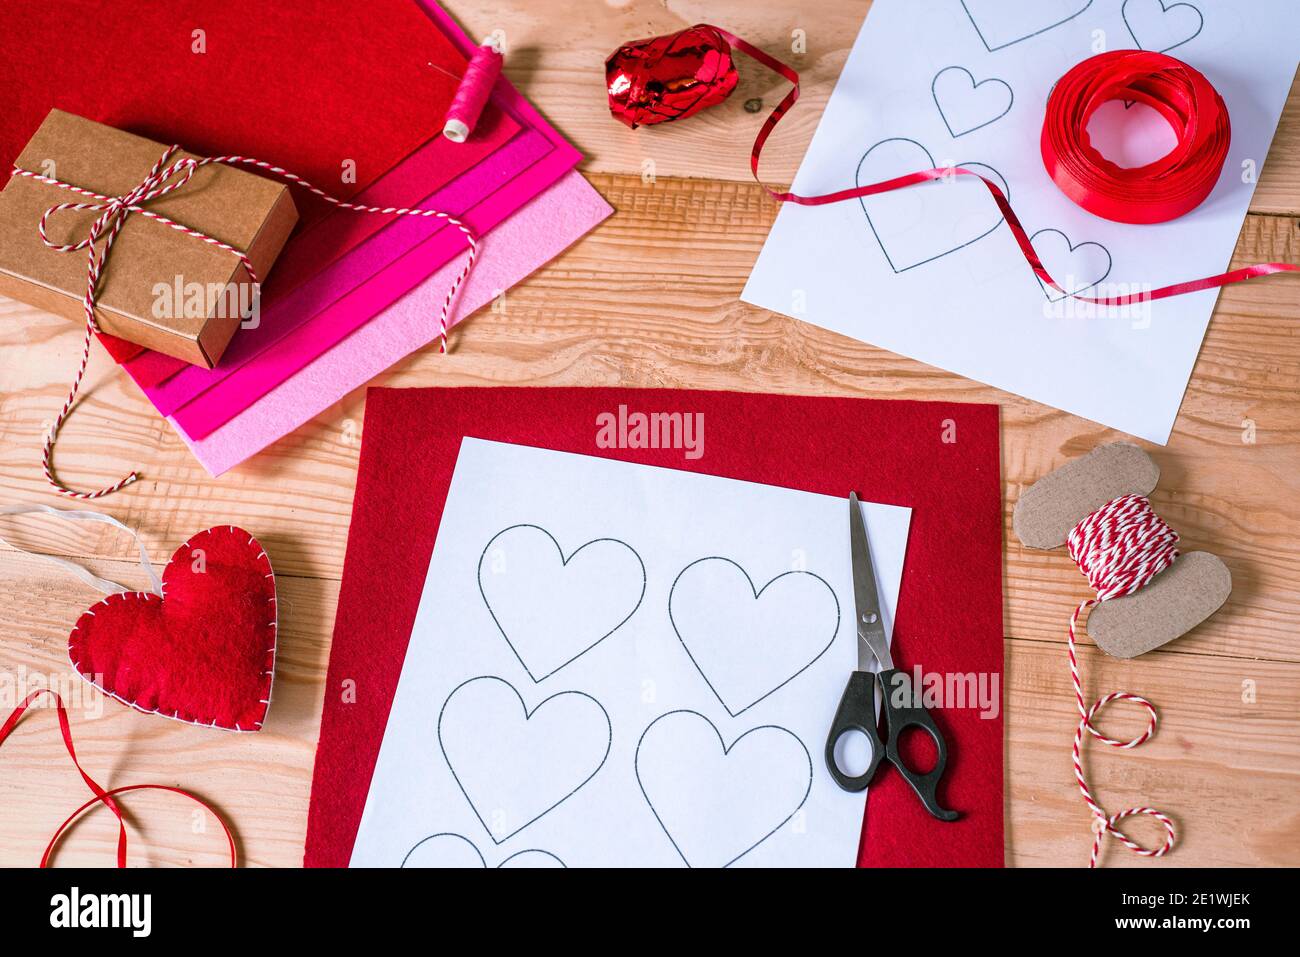 Valentine's day crafting, hearts and decorations mady of felt Stock Photo